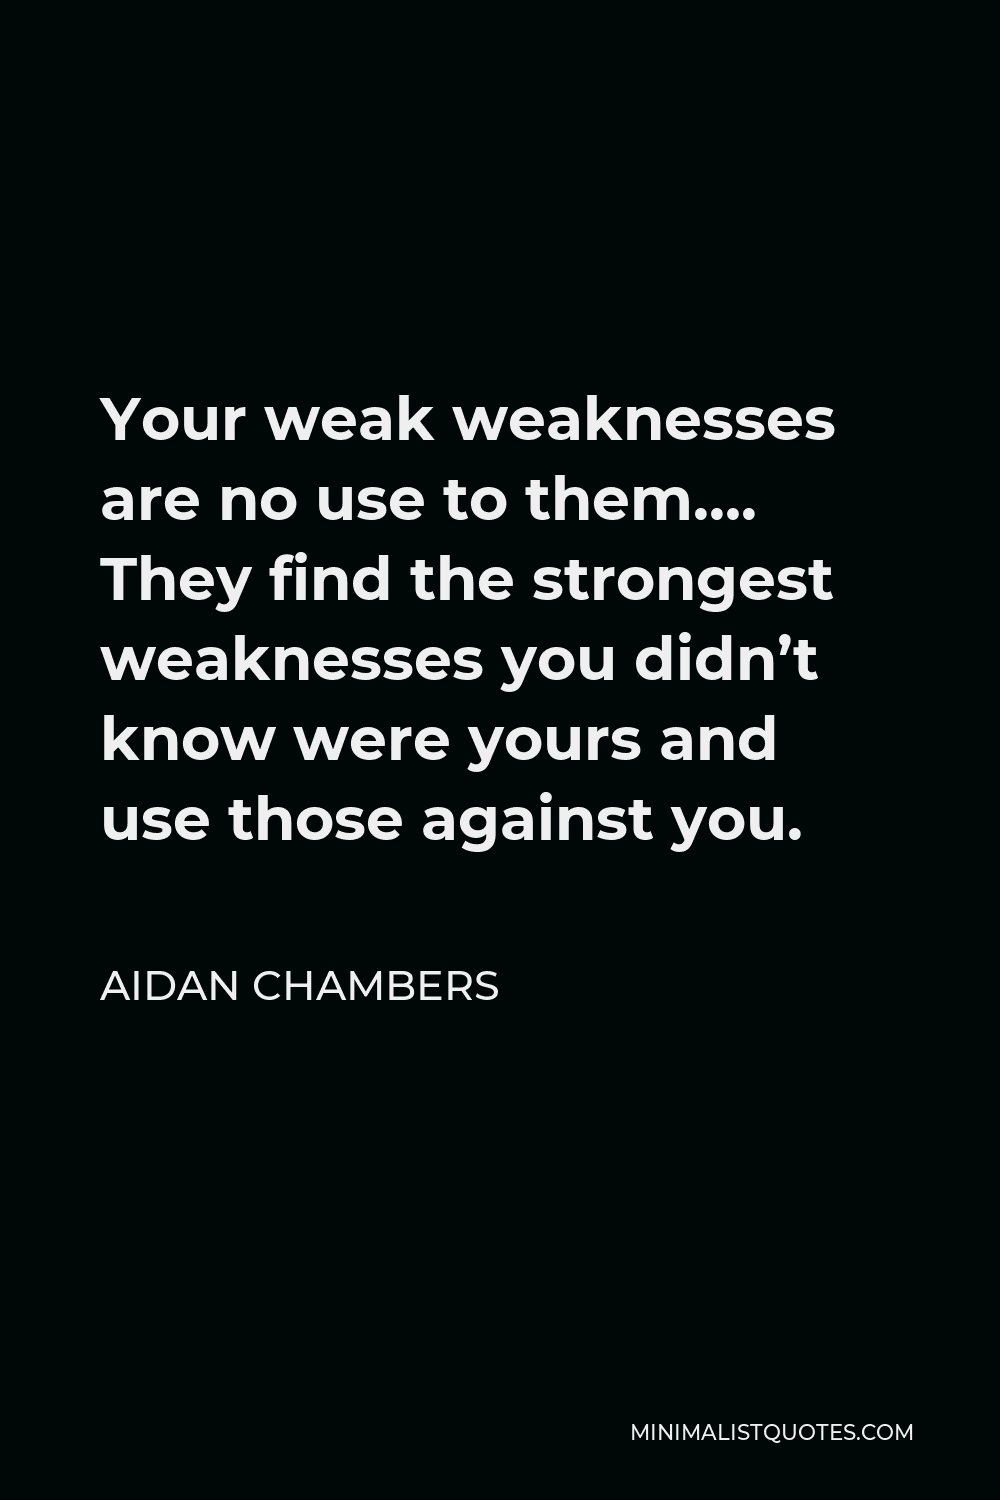 Aidan Chambers Quote - Your weak weaknesses are no use to them…. They find the strongest weaknesses you didn’t know were yours and use those against you.